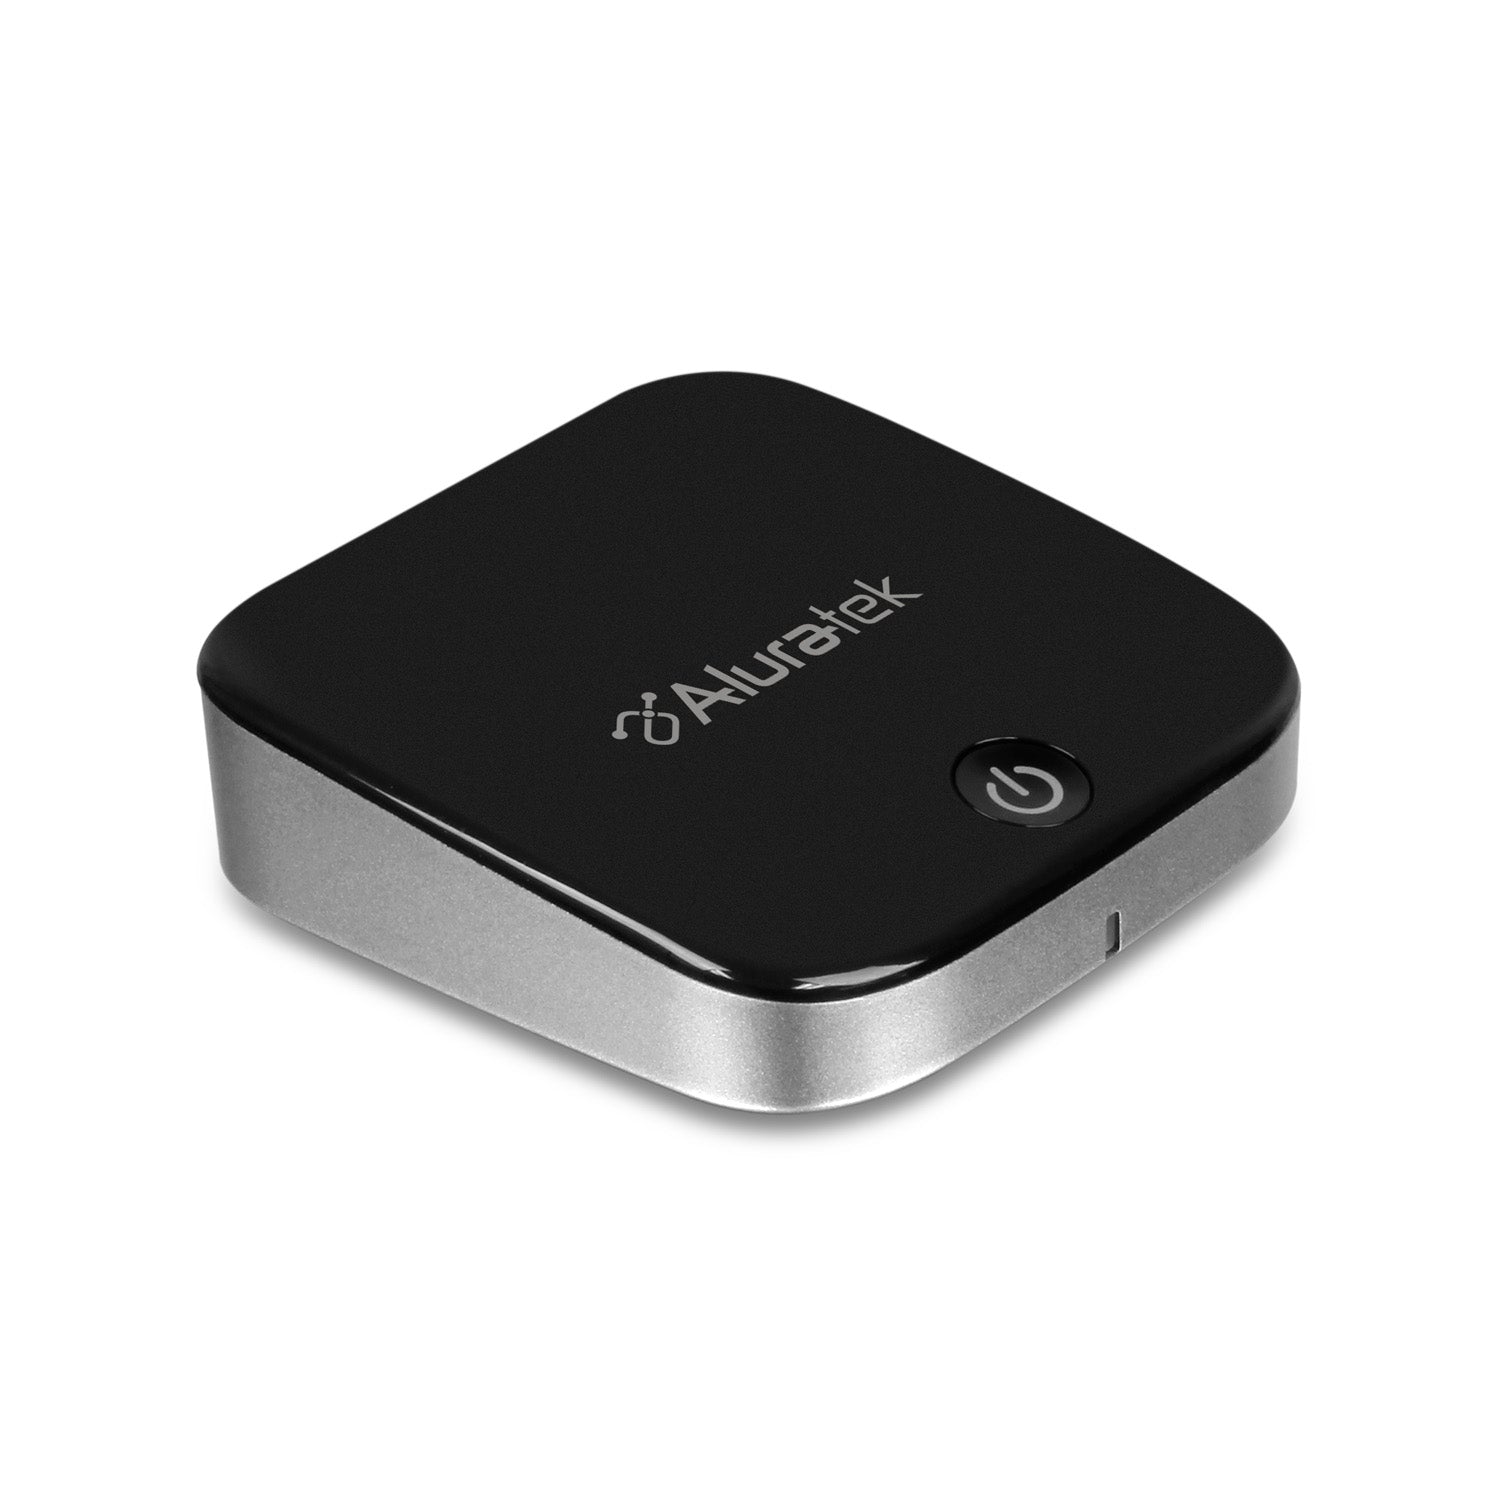 Aisidra Bluetooth Transmitter Receiver V5.0 Bluetooth Adapter for Audio,  2-in-1 Bluetooth AUX Adapter for TV/Car/PC/MP3 Player/Home Theater/Switch